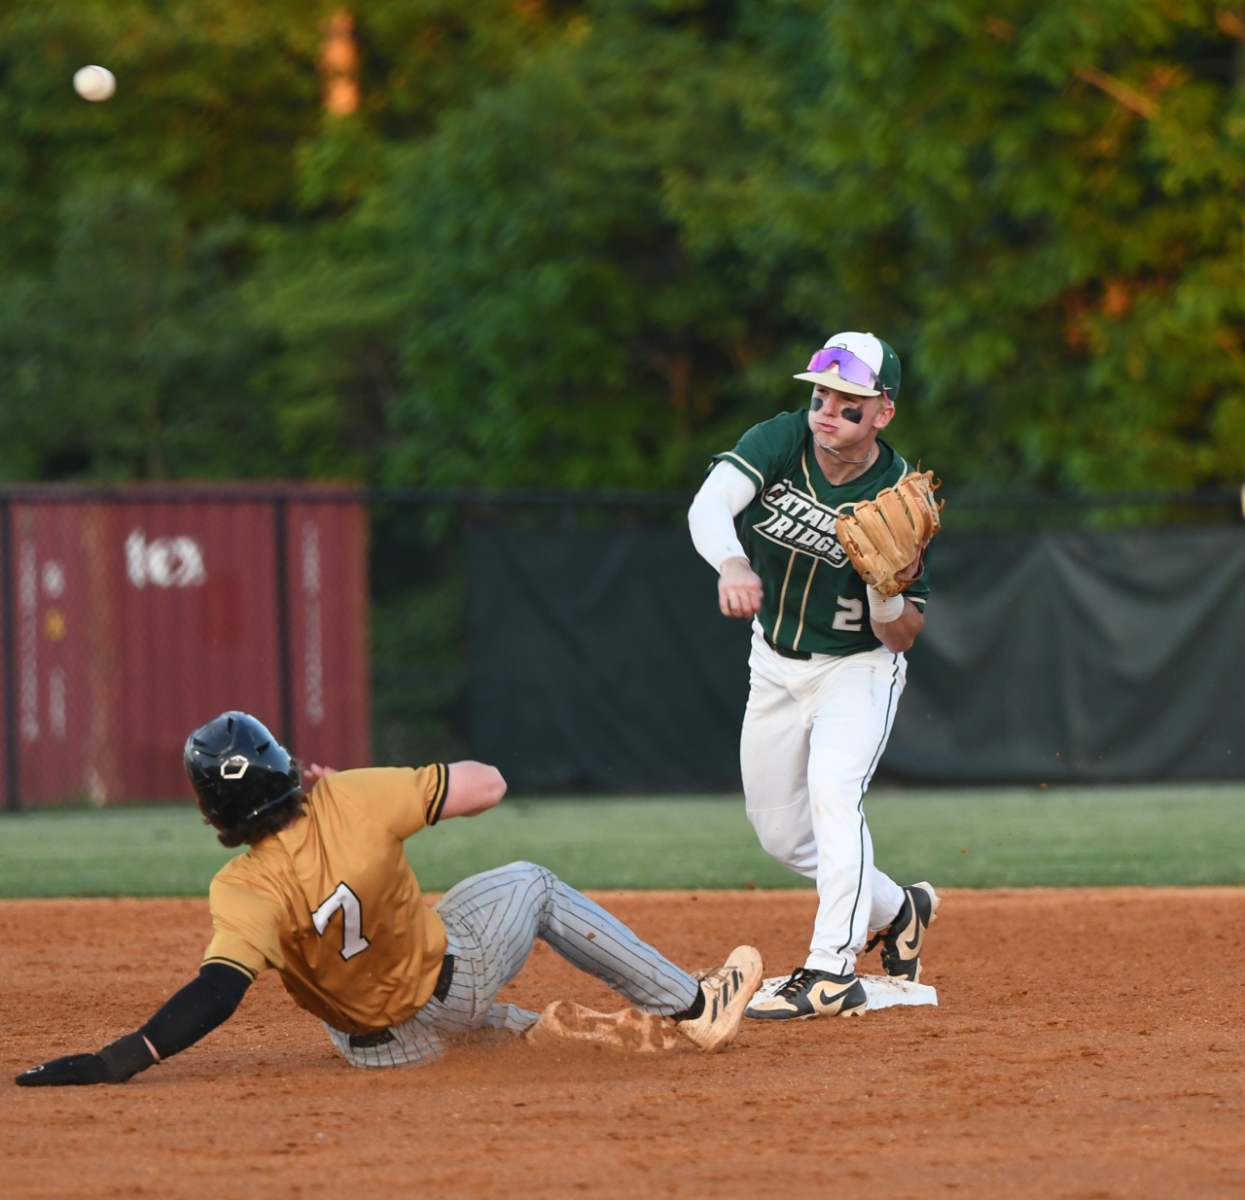 Copperheads rally past North Augusta to keep advancing in the playoffs (May 1 Roundup)